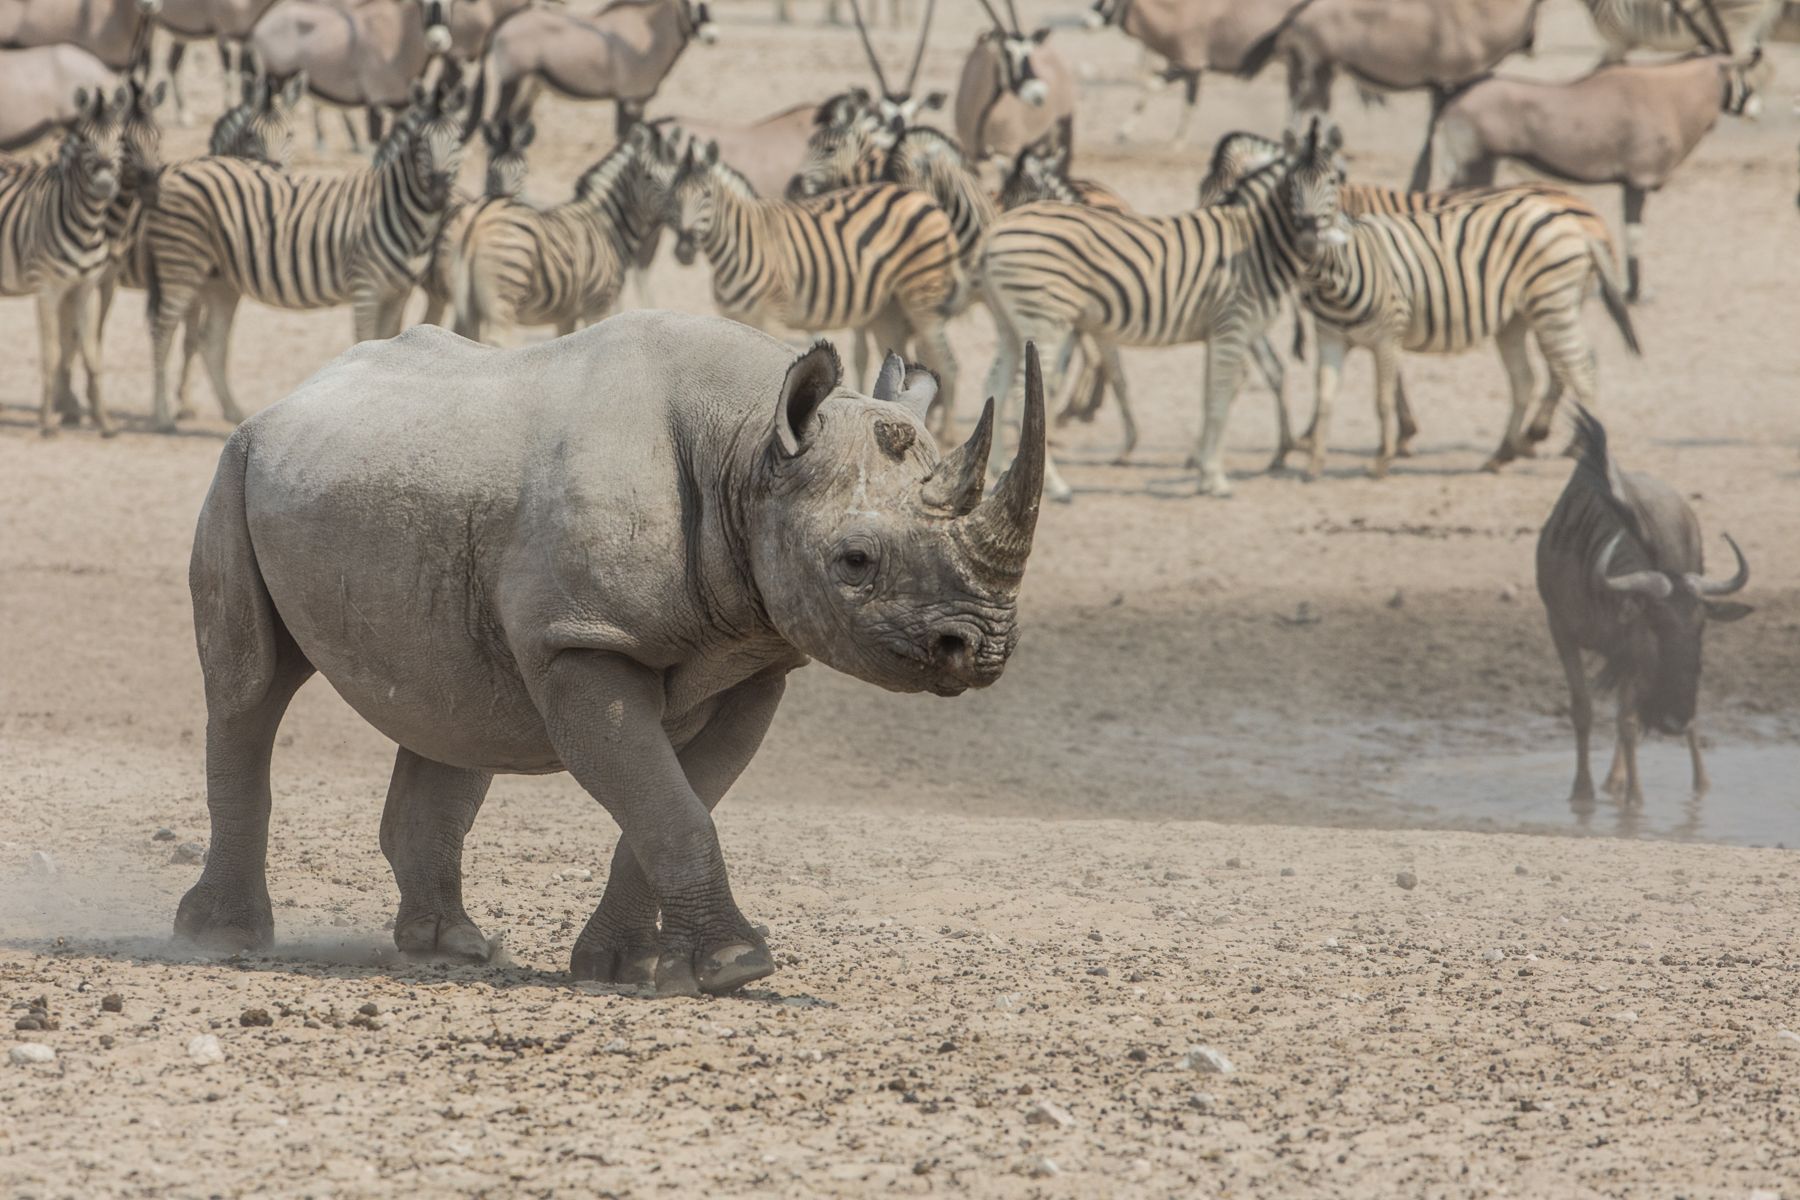 A Black Rhinoceros takes charge of the scene at a waterhole in Etosha